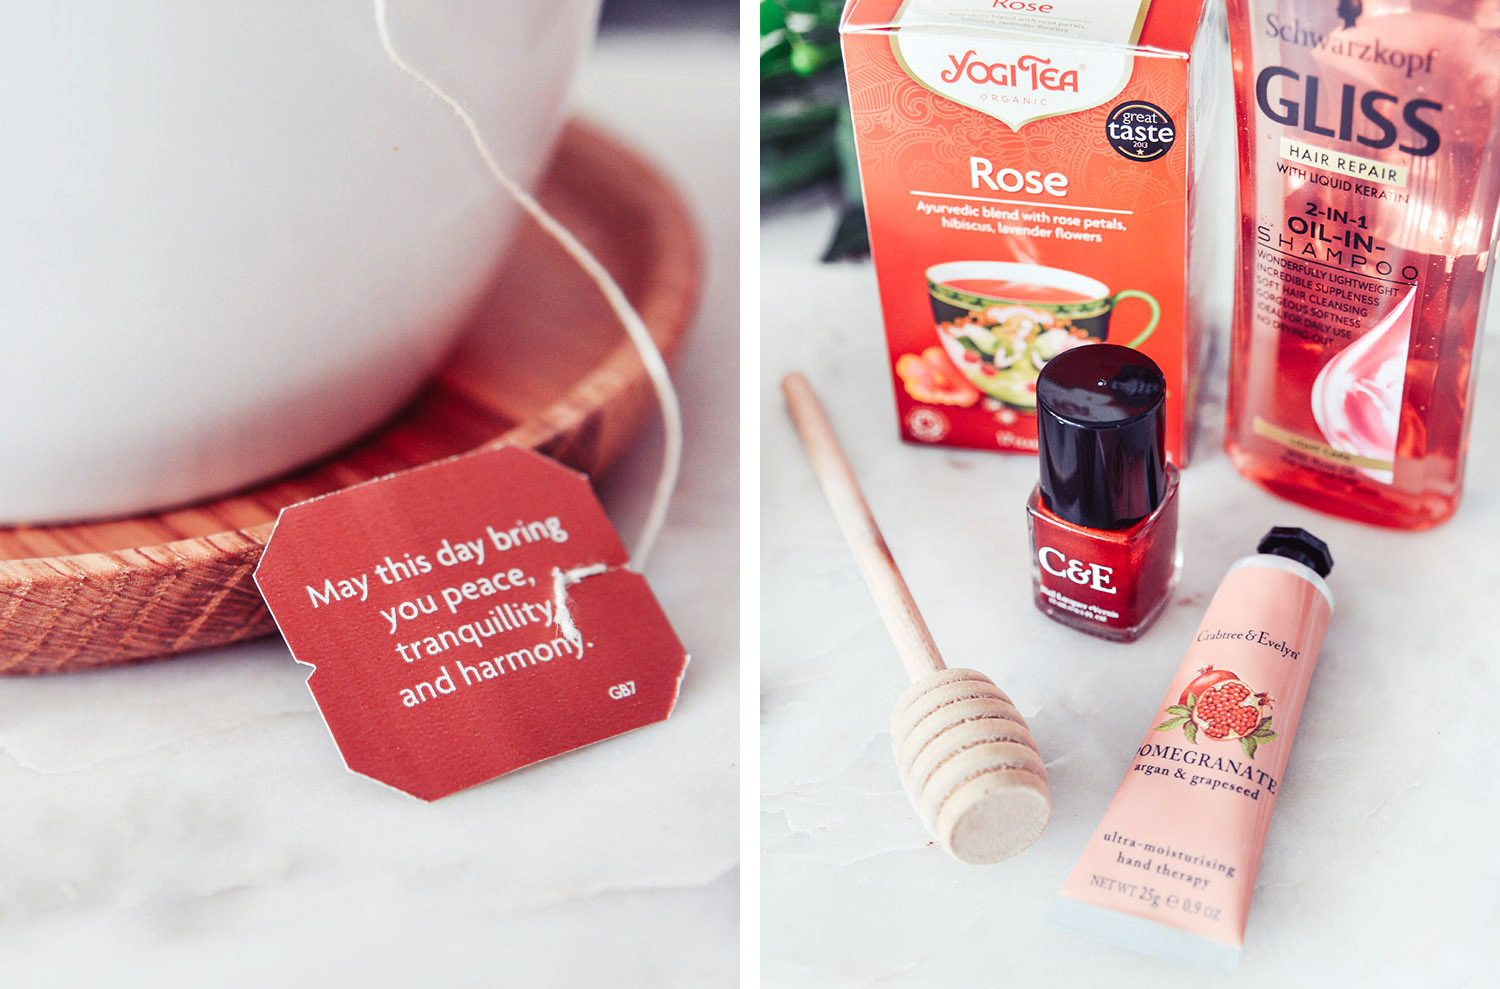 YogiTea Rose & Crabtree & Evelyn Pomegranate Argan & Grapeseed Hand Therapy